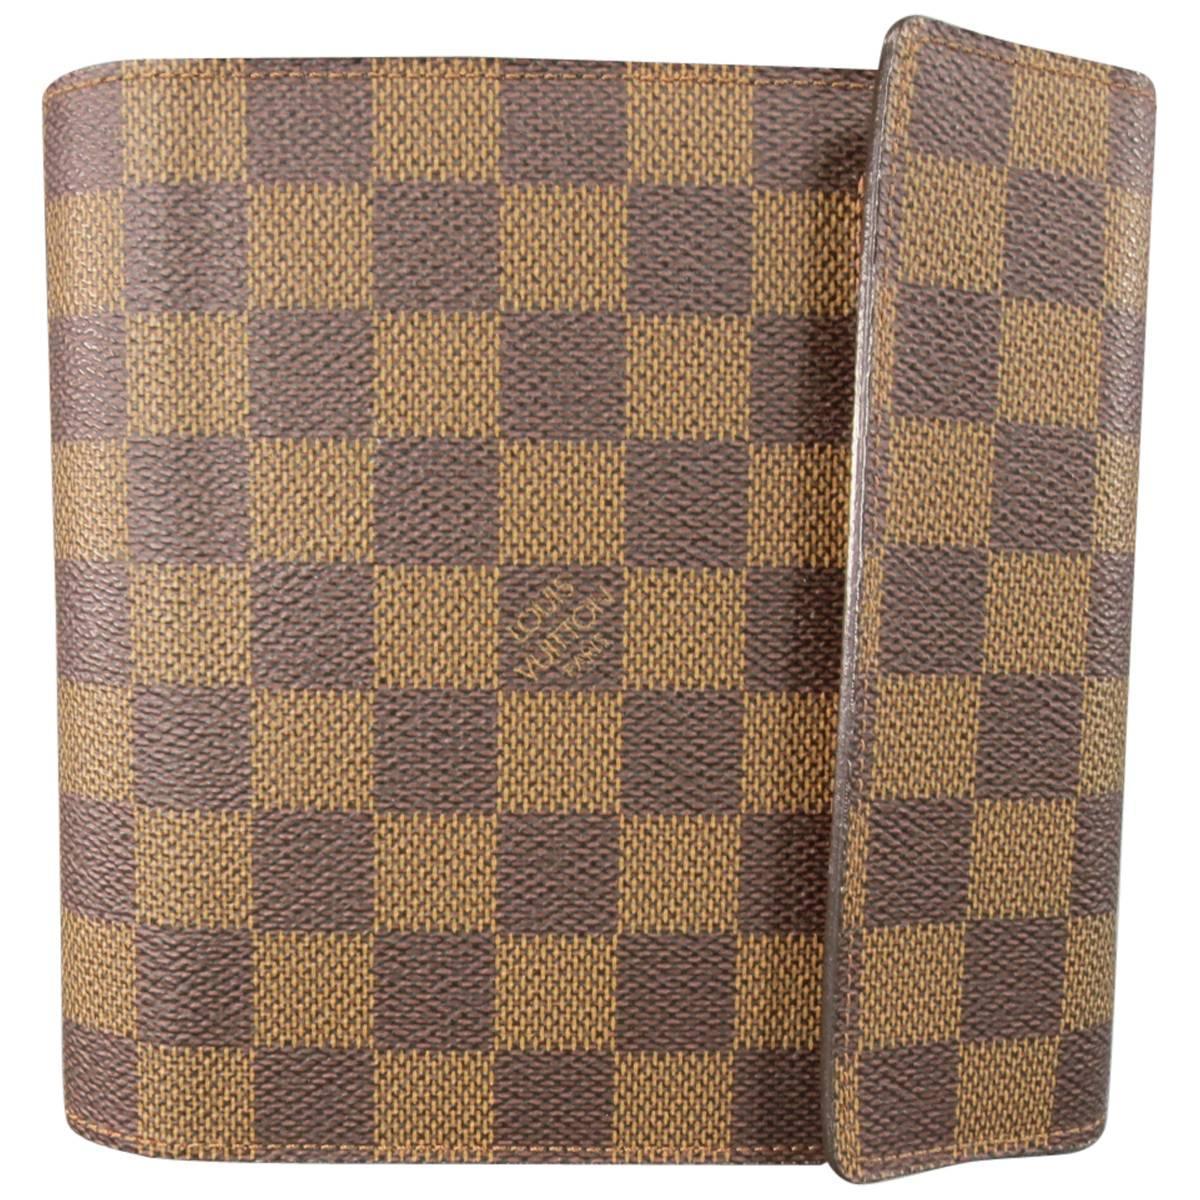 Louis Vuitton Brown Checkered Wallet - 3 For Sale on 1stDibs